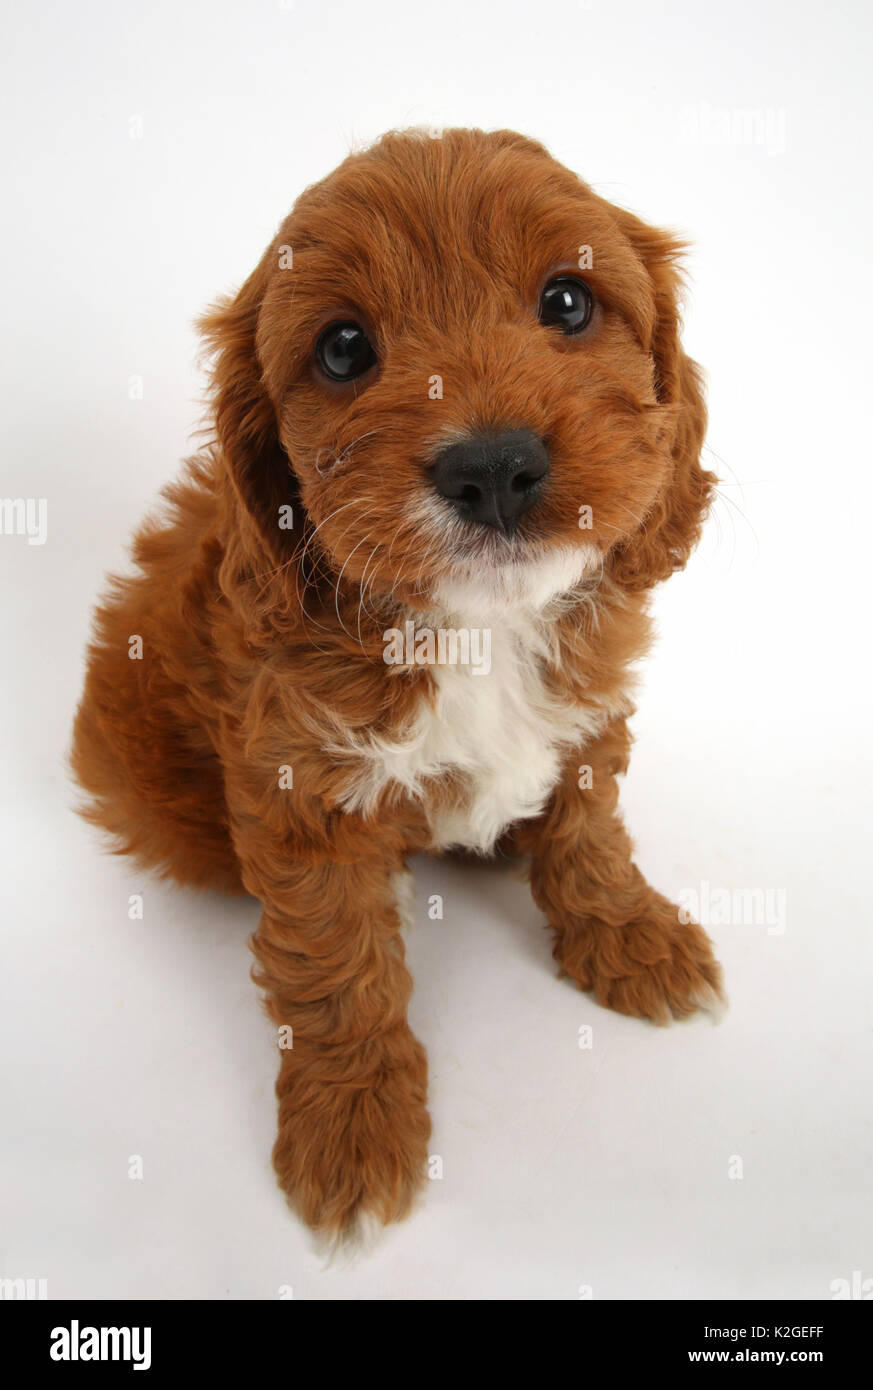 Cavapoo Cavalier King Charles Spaniel x age 6 weeks, sitting and up Stock Photo - Alamy